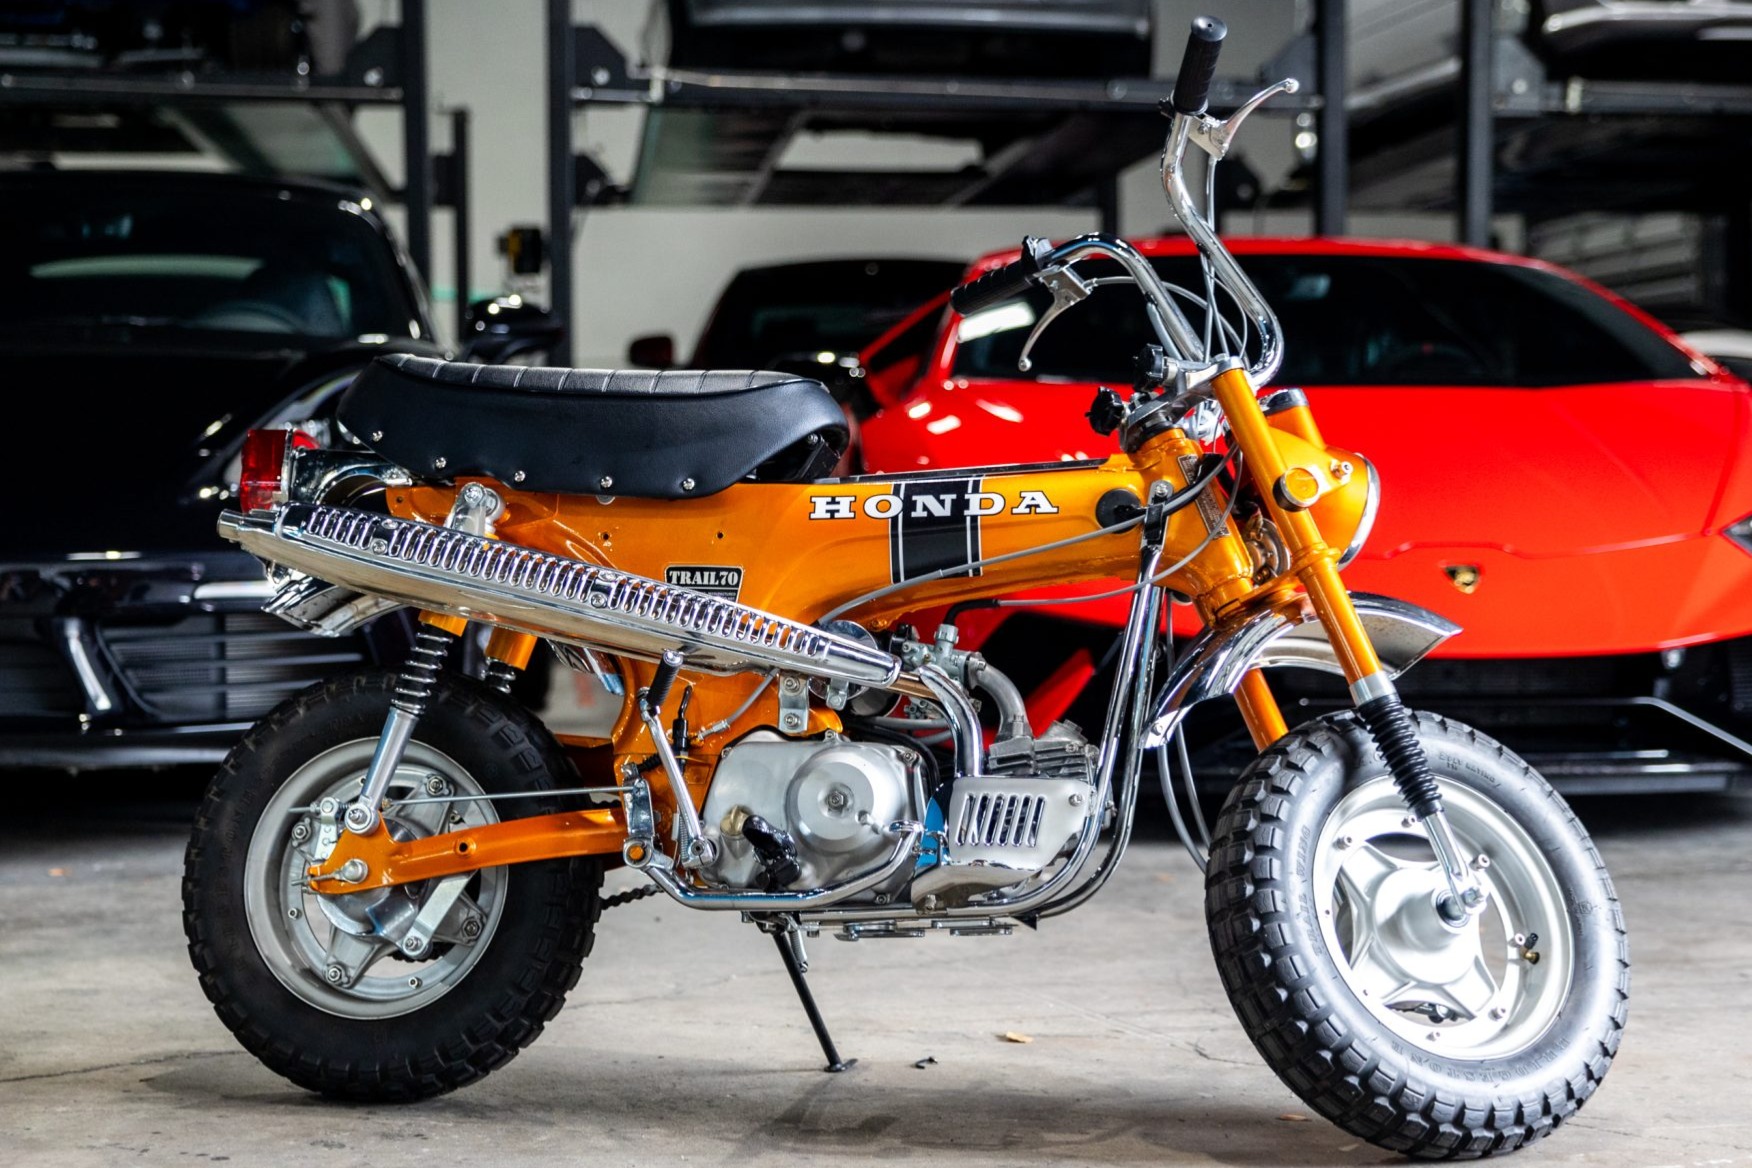 Used 1970 Honda CT70 Trail Review